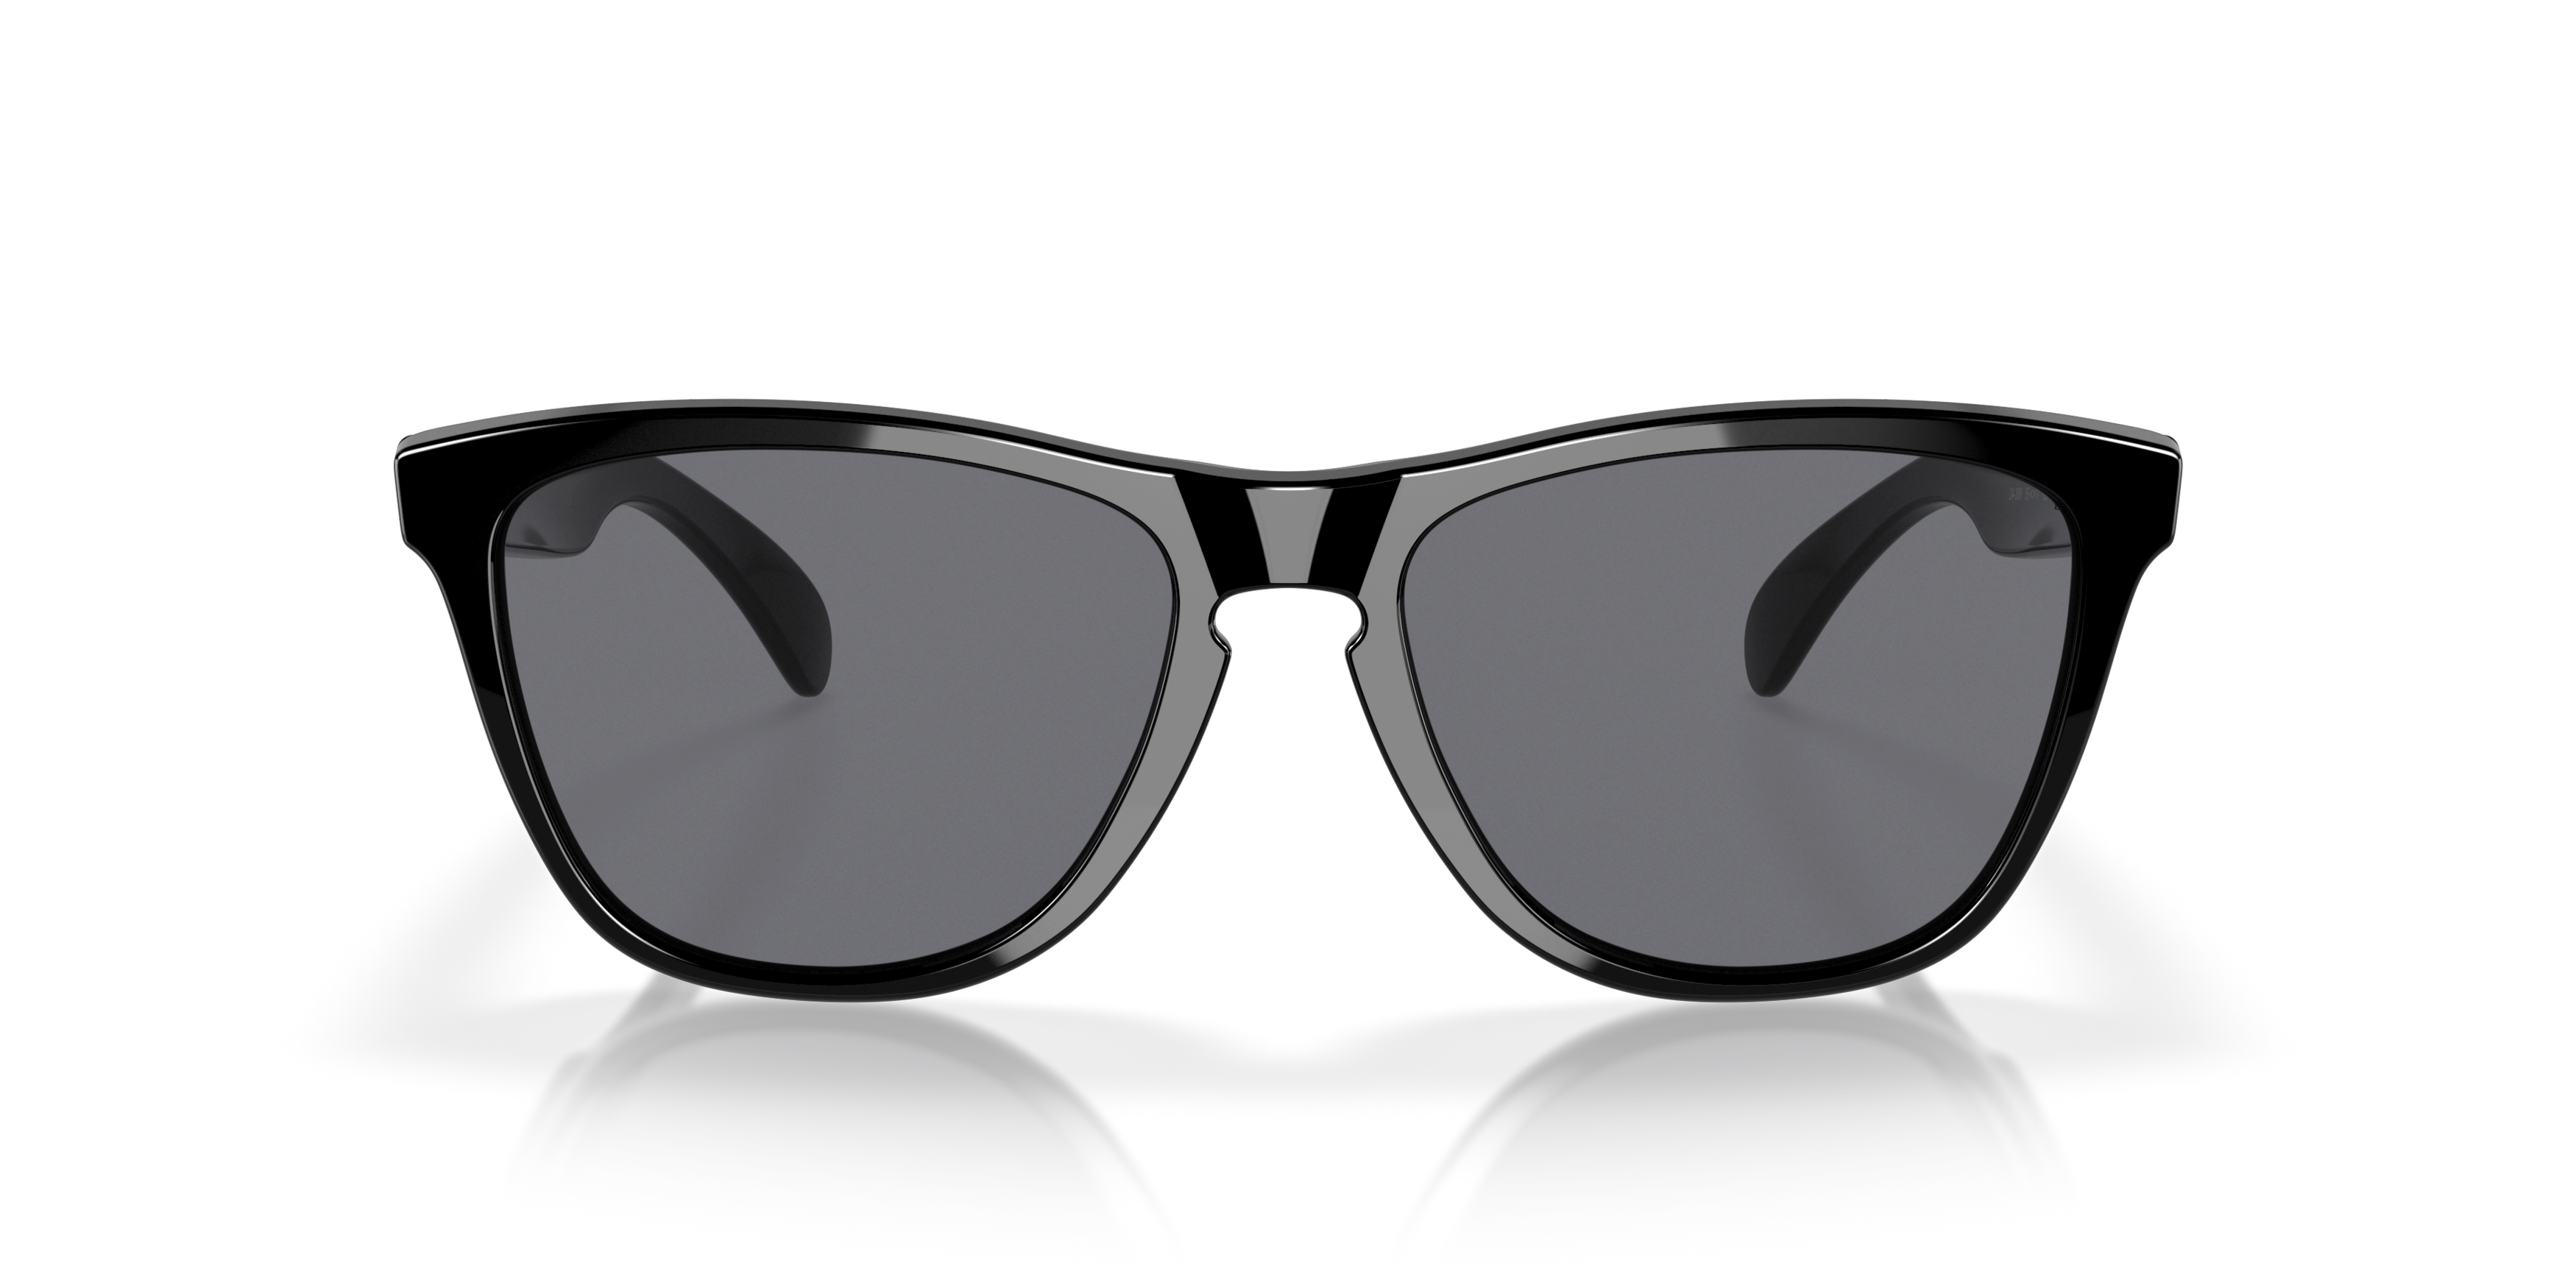 [products.image.front] Oakley Frogskins OO9013 306